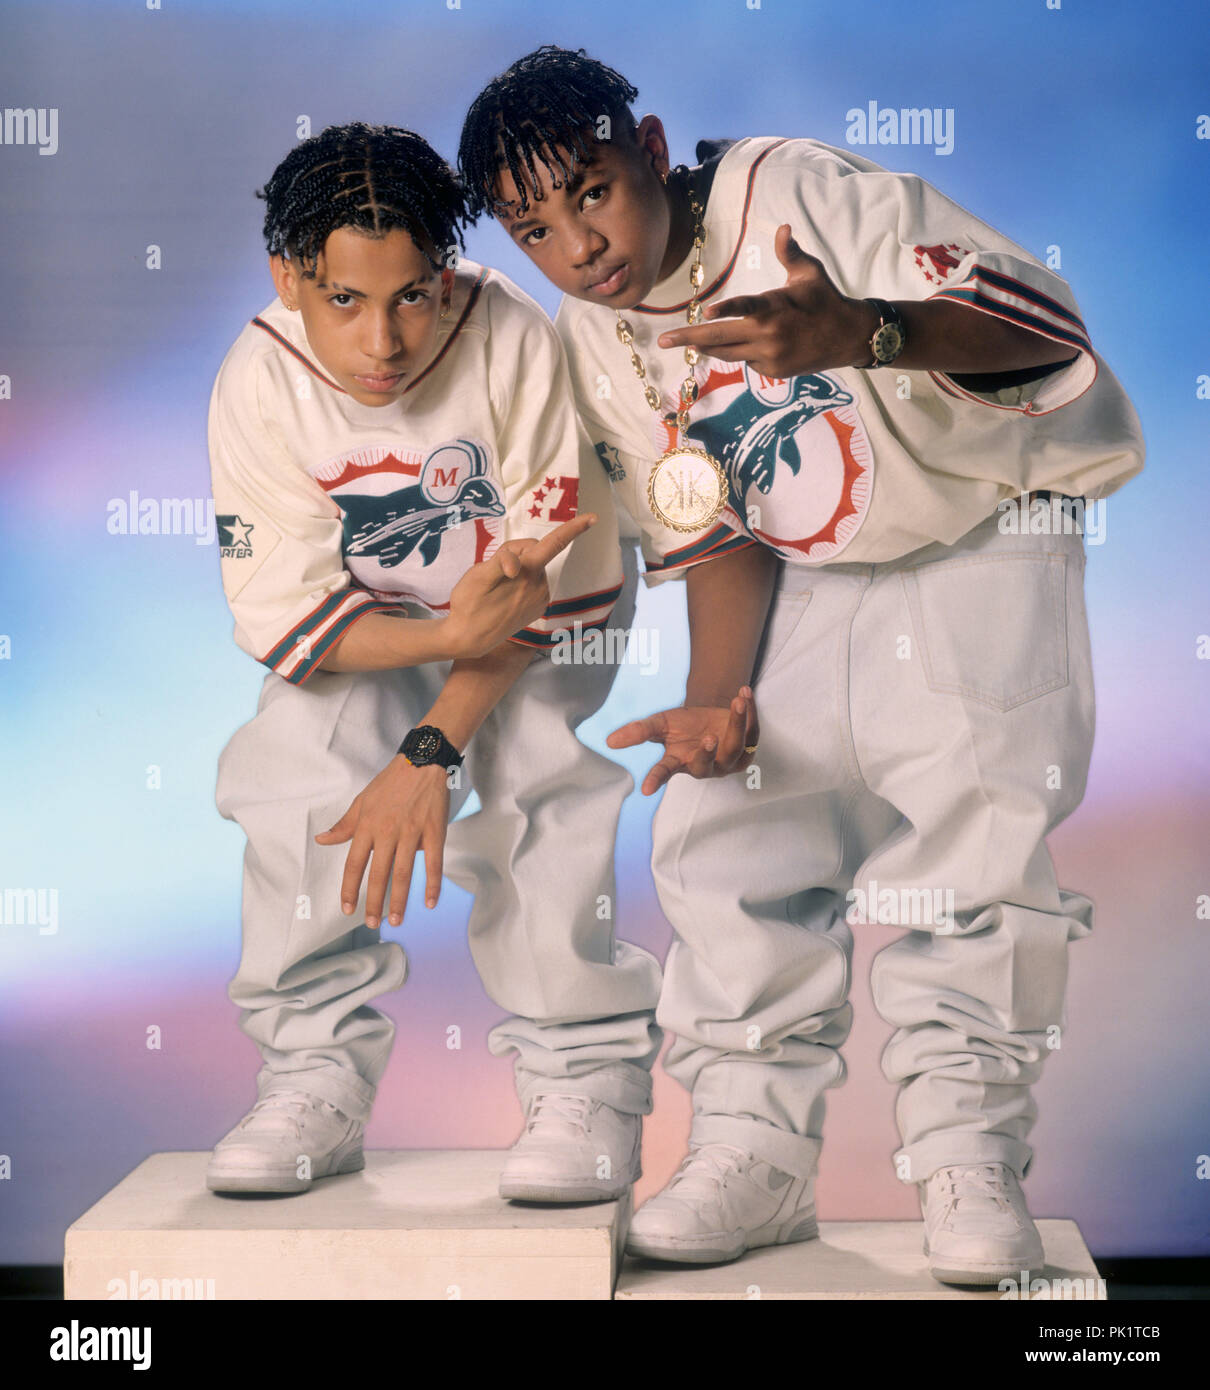 The Pinnacle of 1990s Fashion and Music: Starter Jerseys and Kris Kross –  80s Baby